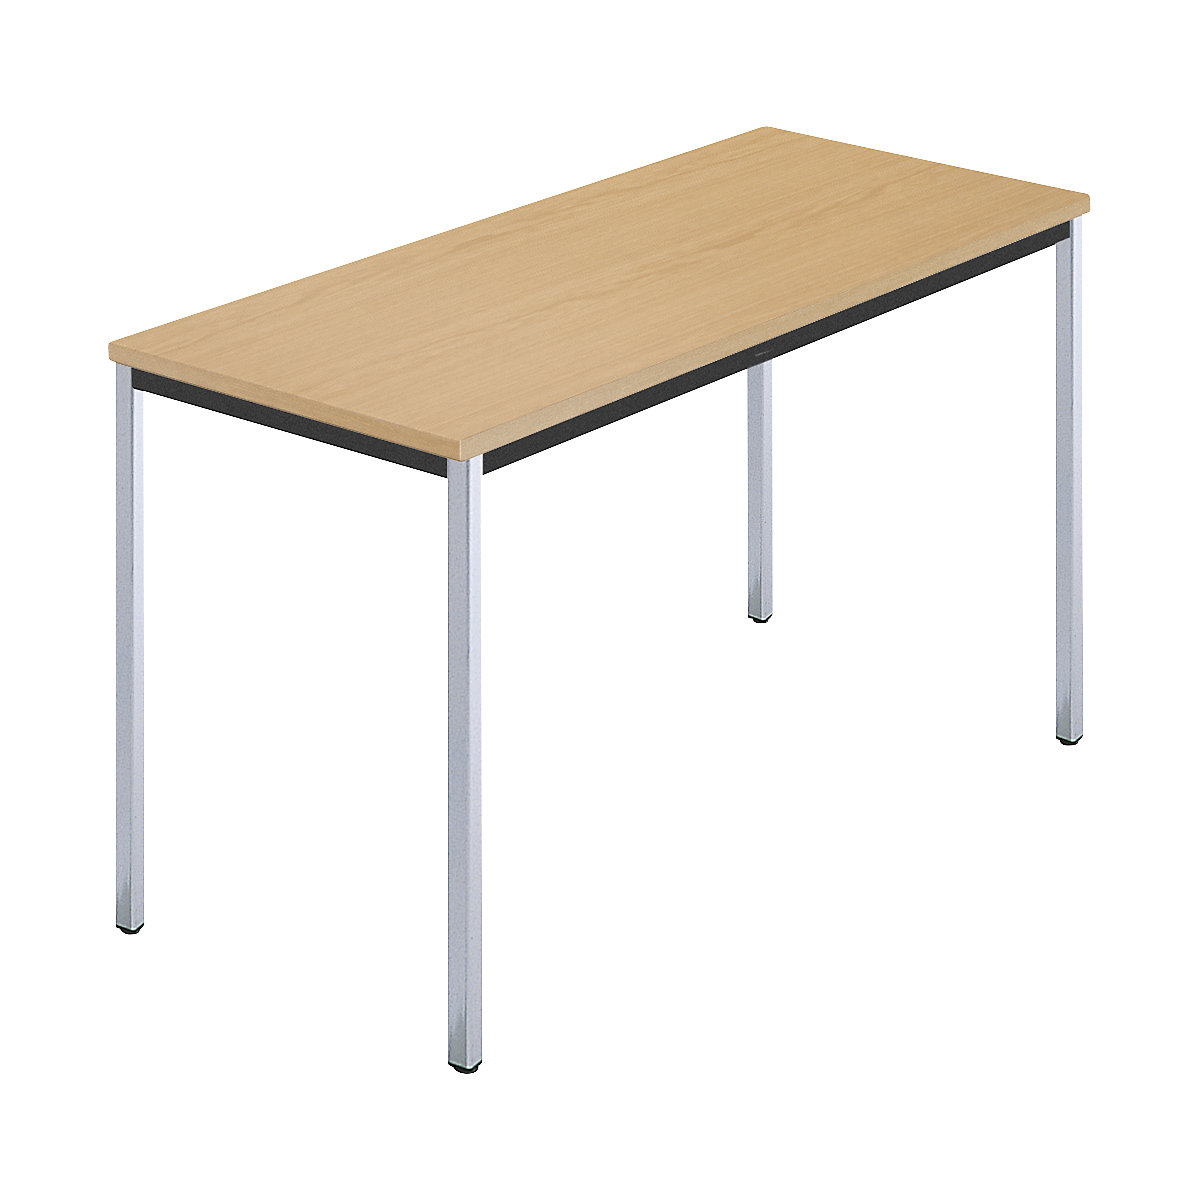 Rectangular table, square tubular steel chrome plated, WxD 1200 x 600 mm, natural beech finish-5